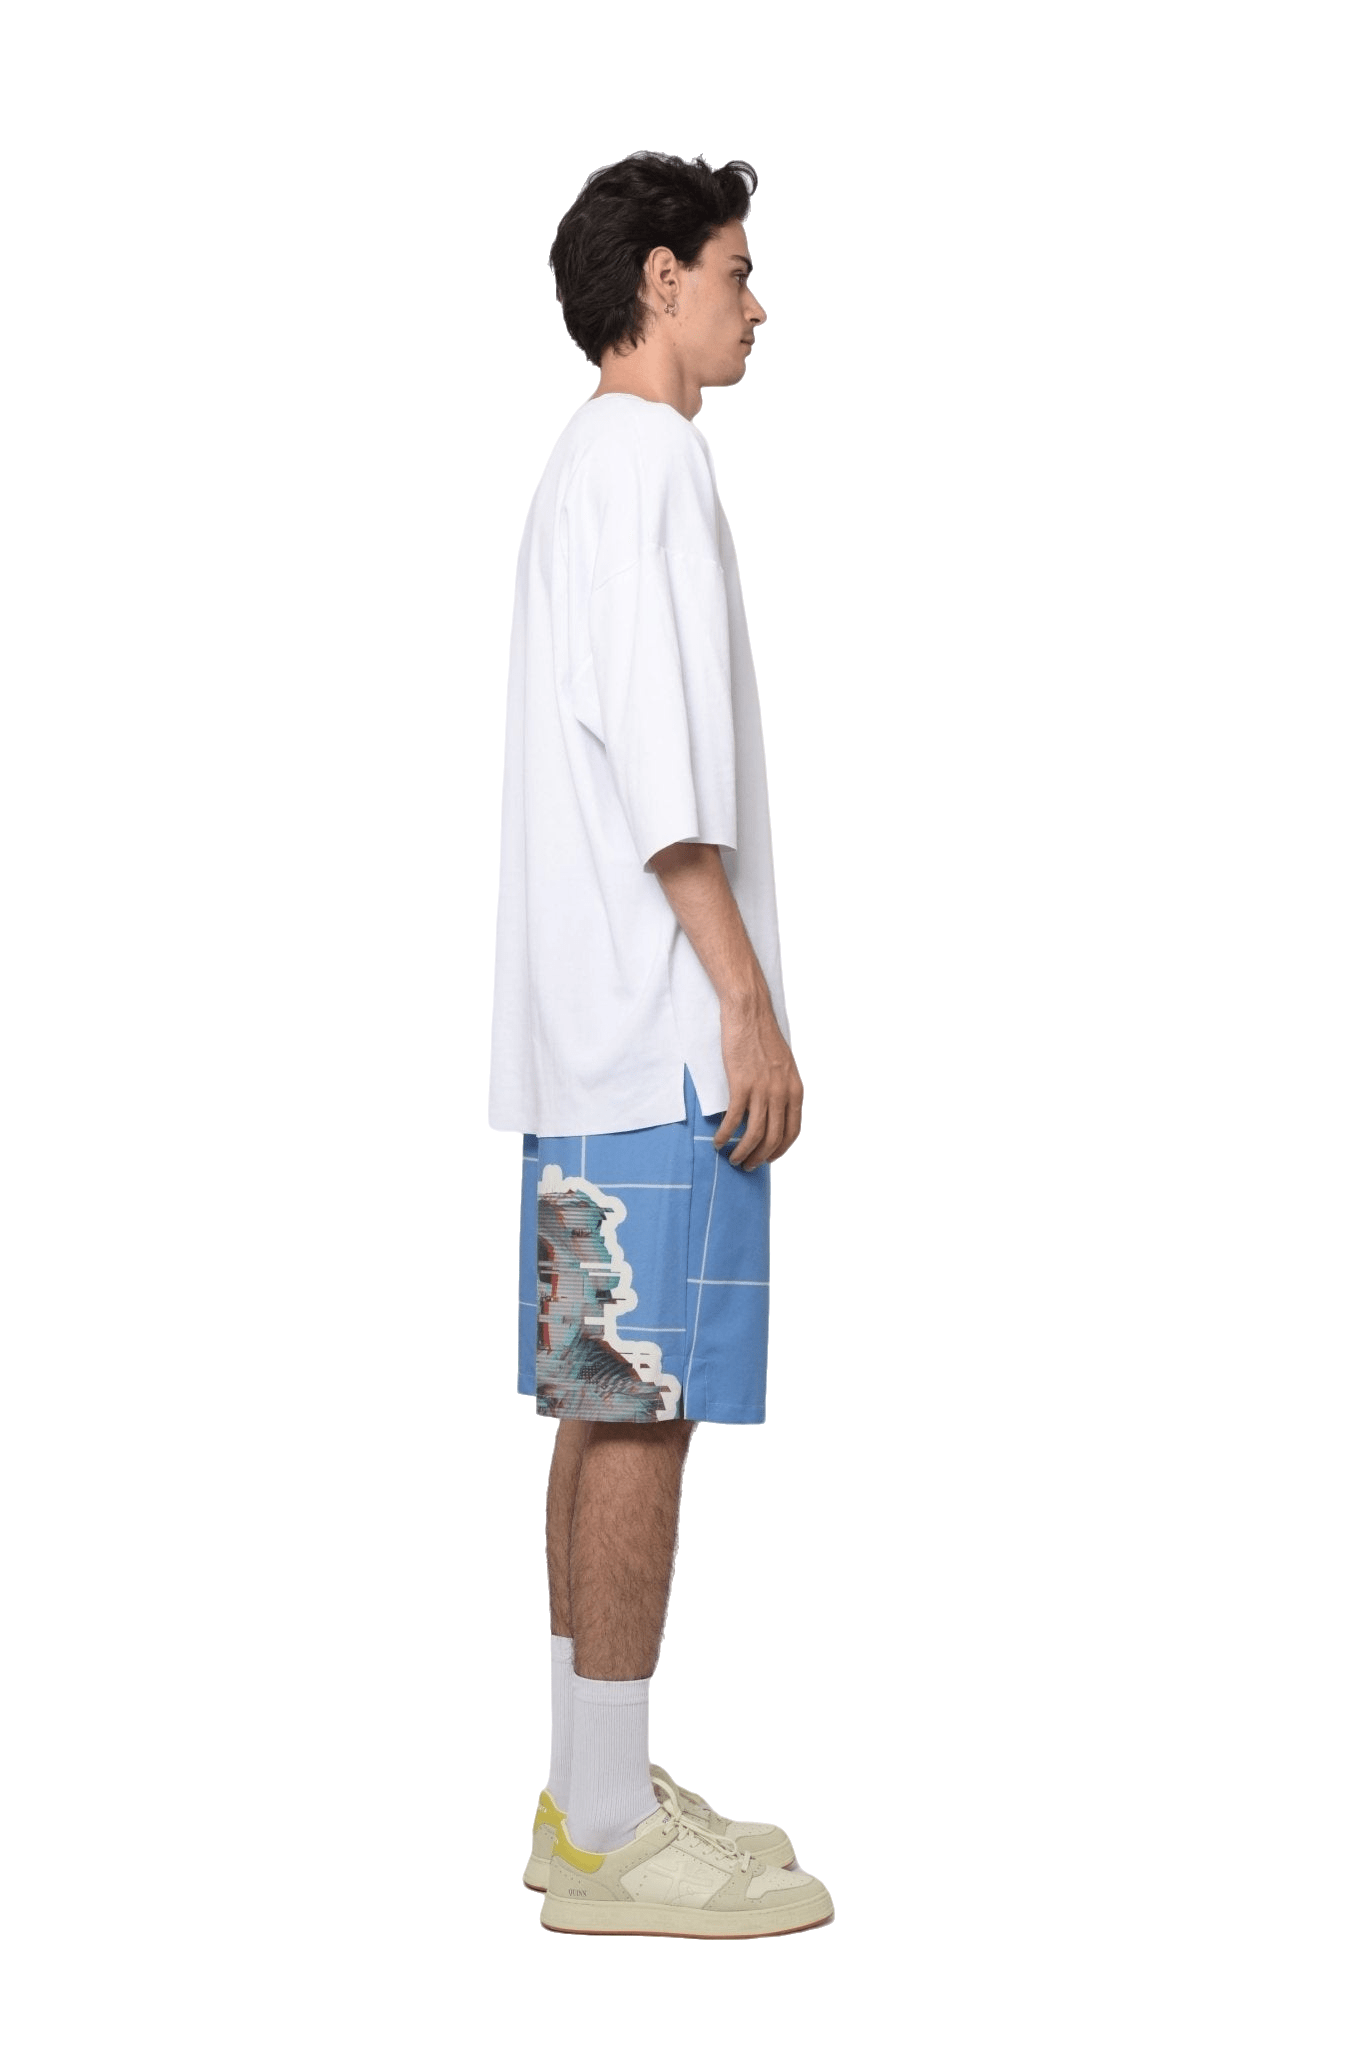 Bermuda Shorts Glitched Astronaut (recycled fabric) - mysimplicated